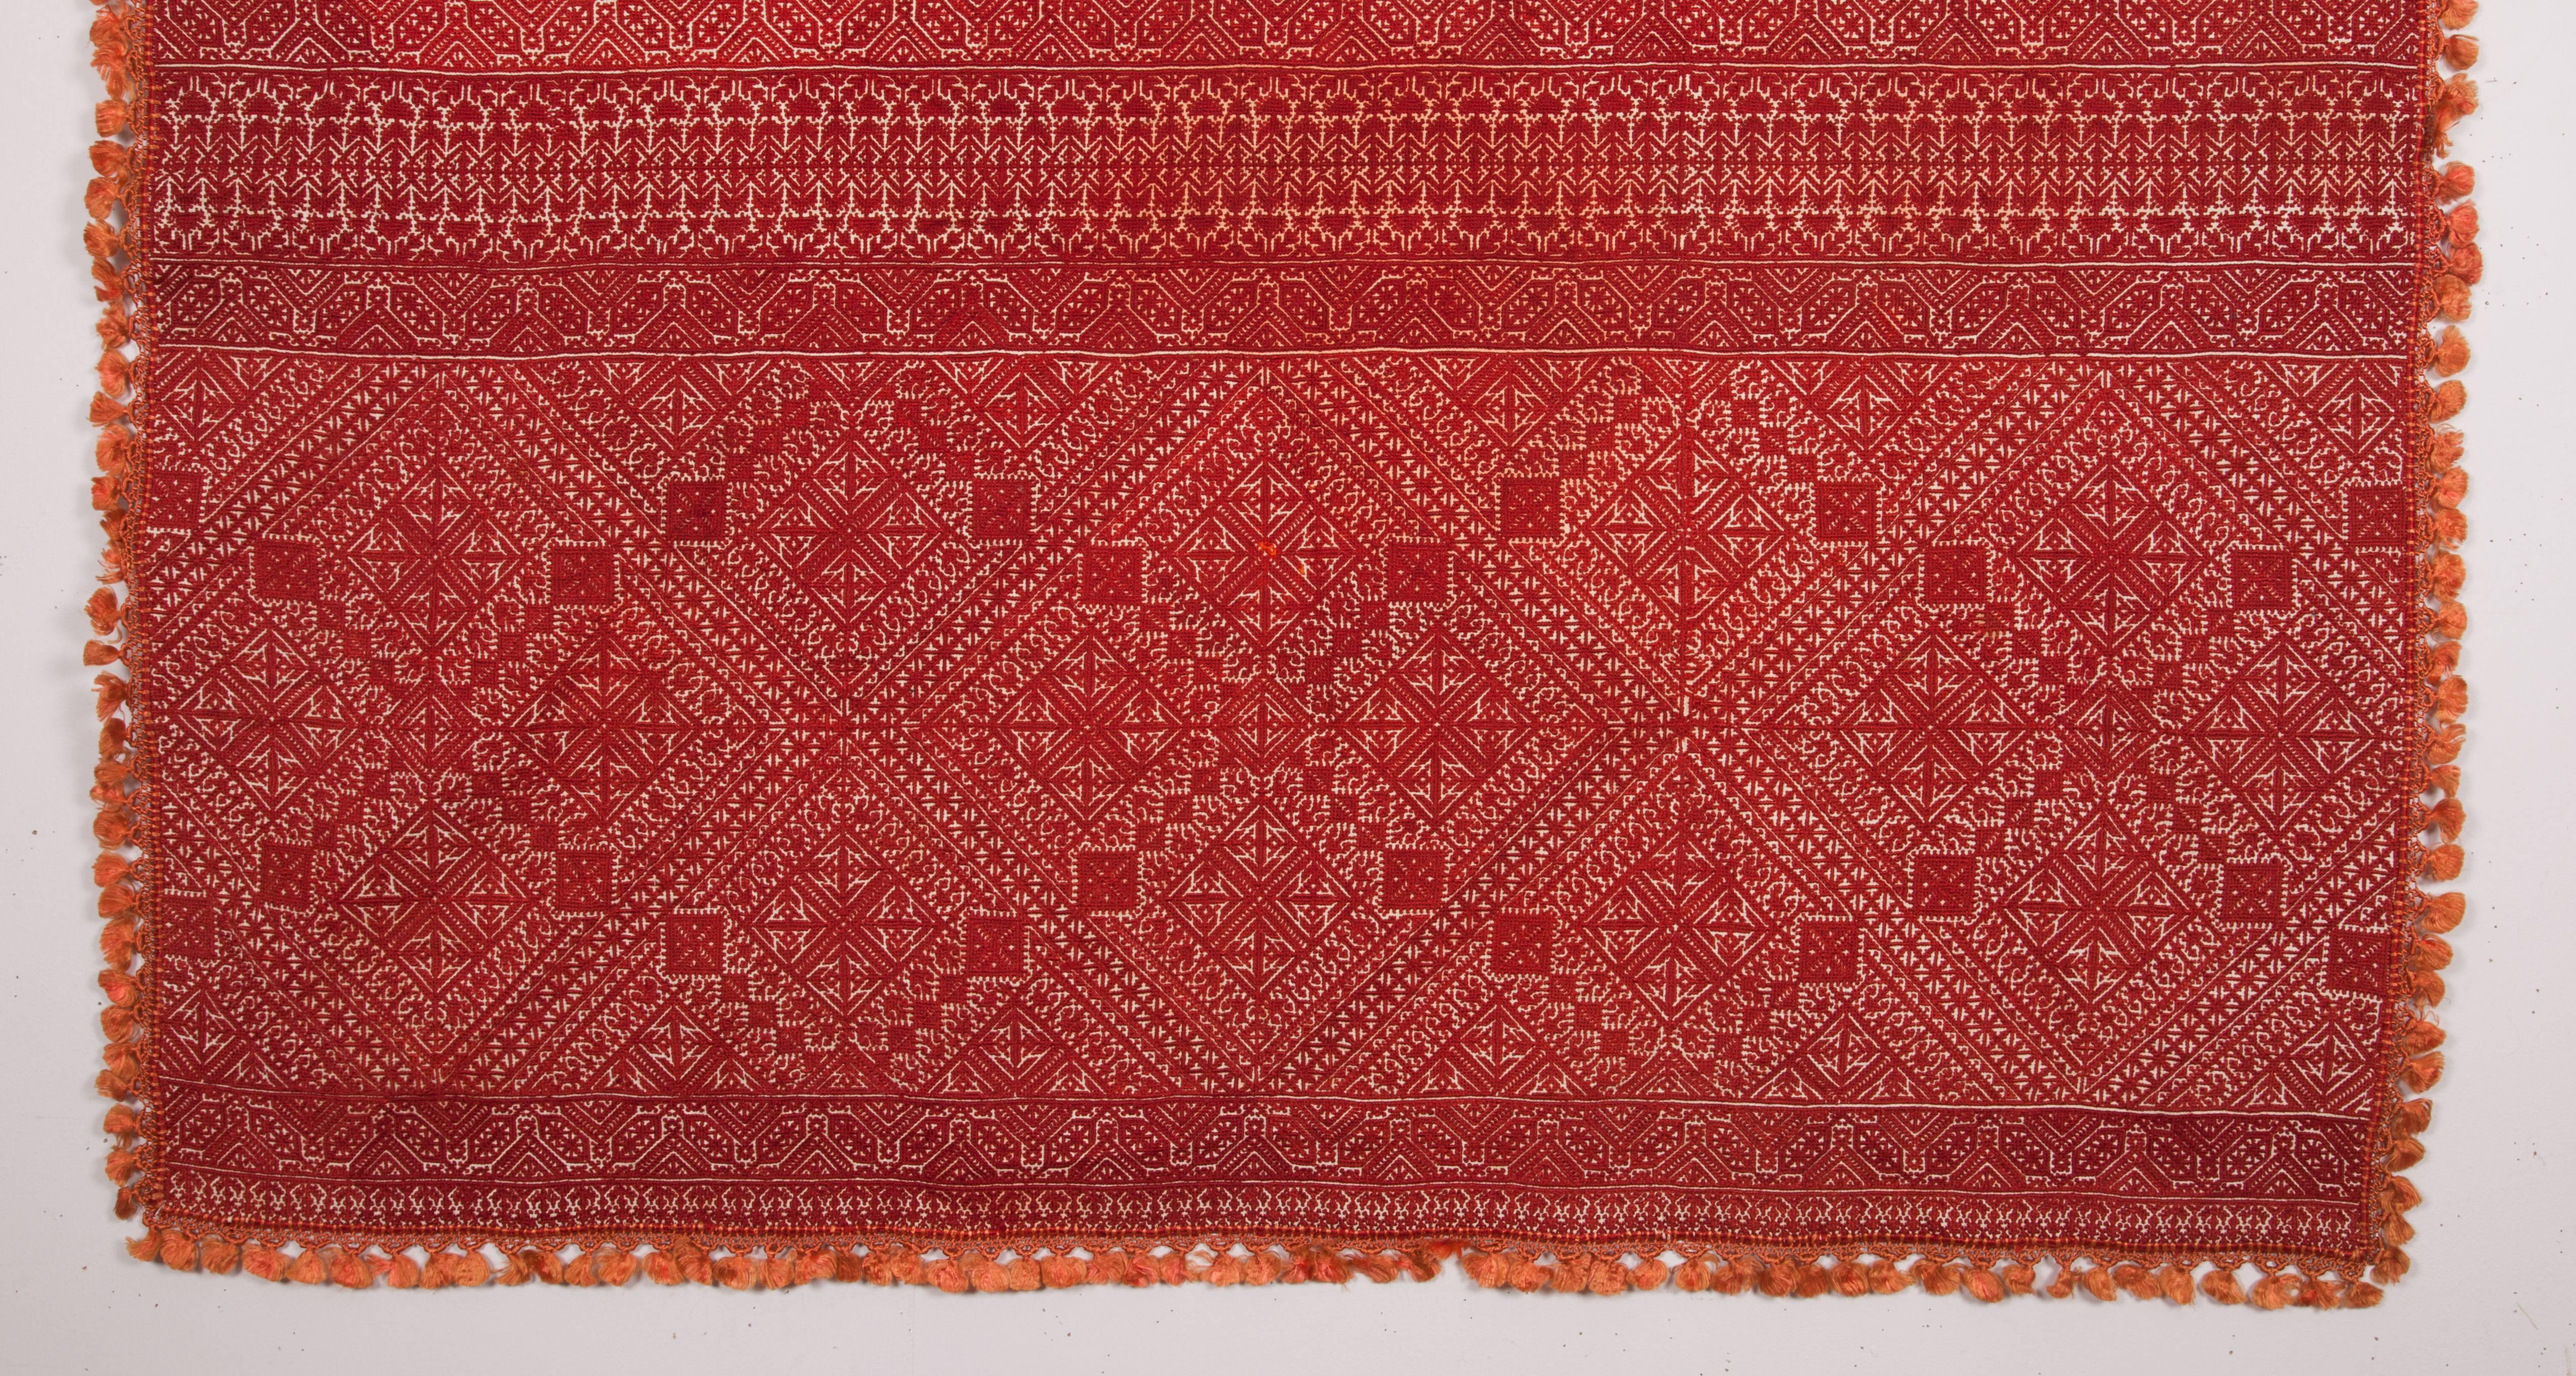 Tribal 19th Century Antique Moroccan Fez Embroidery